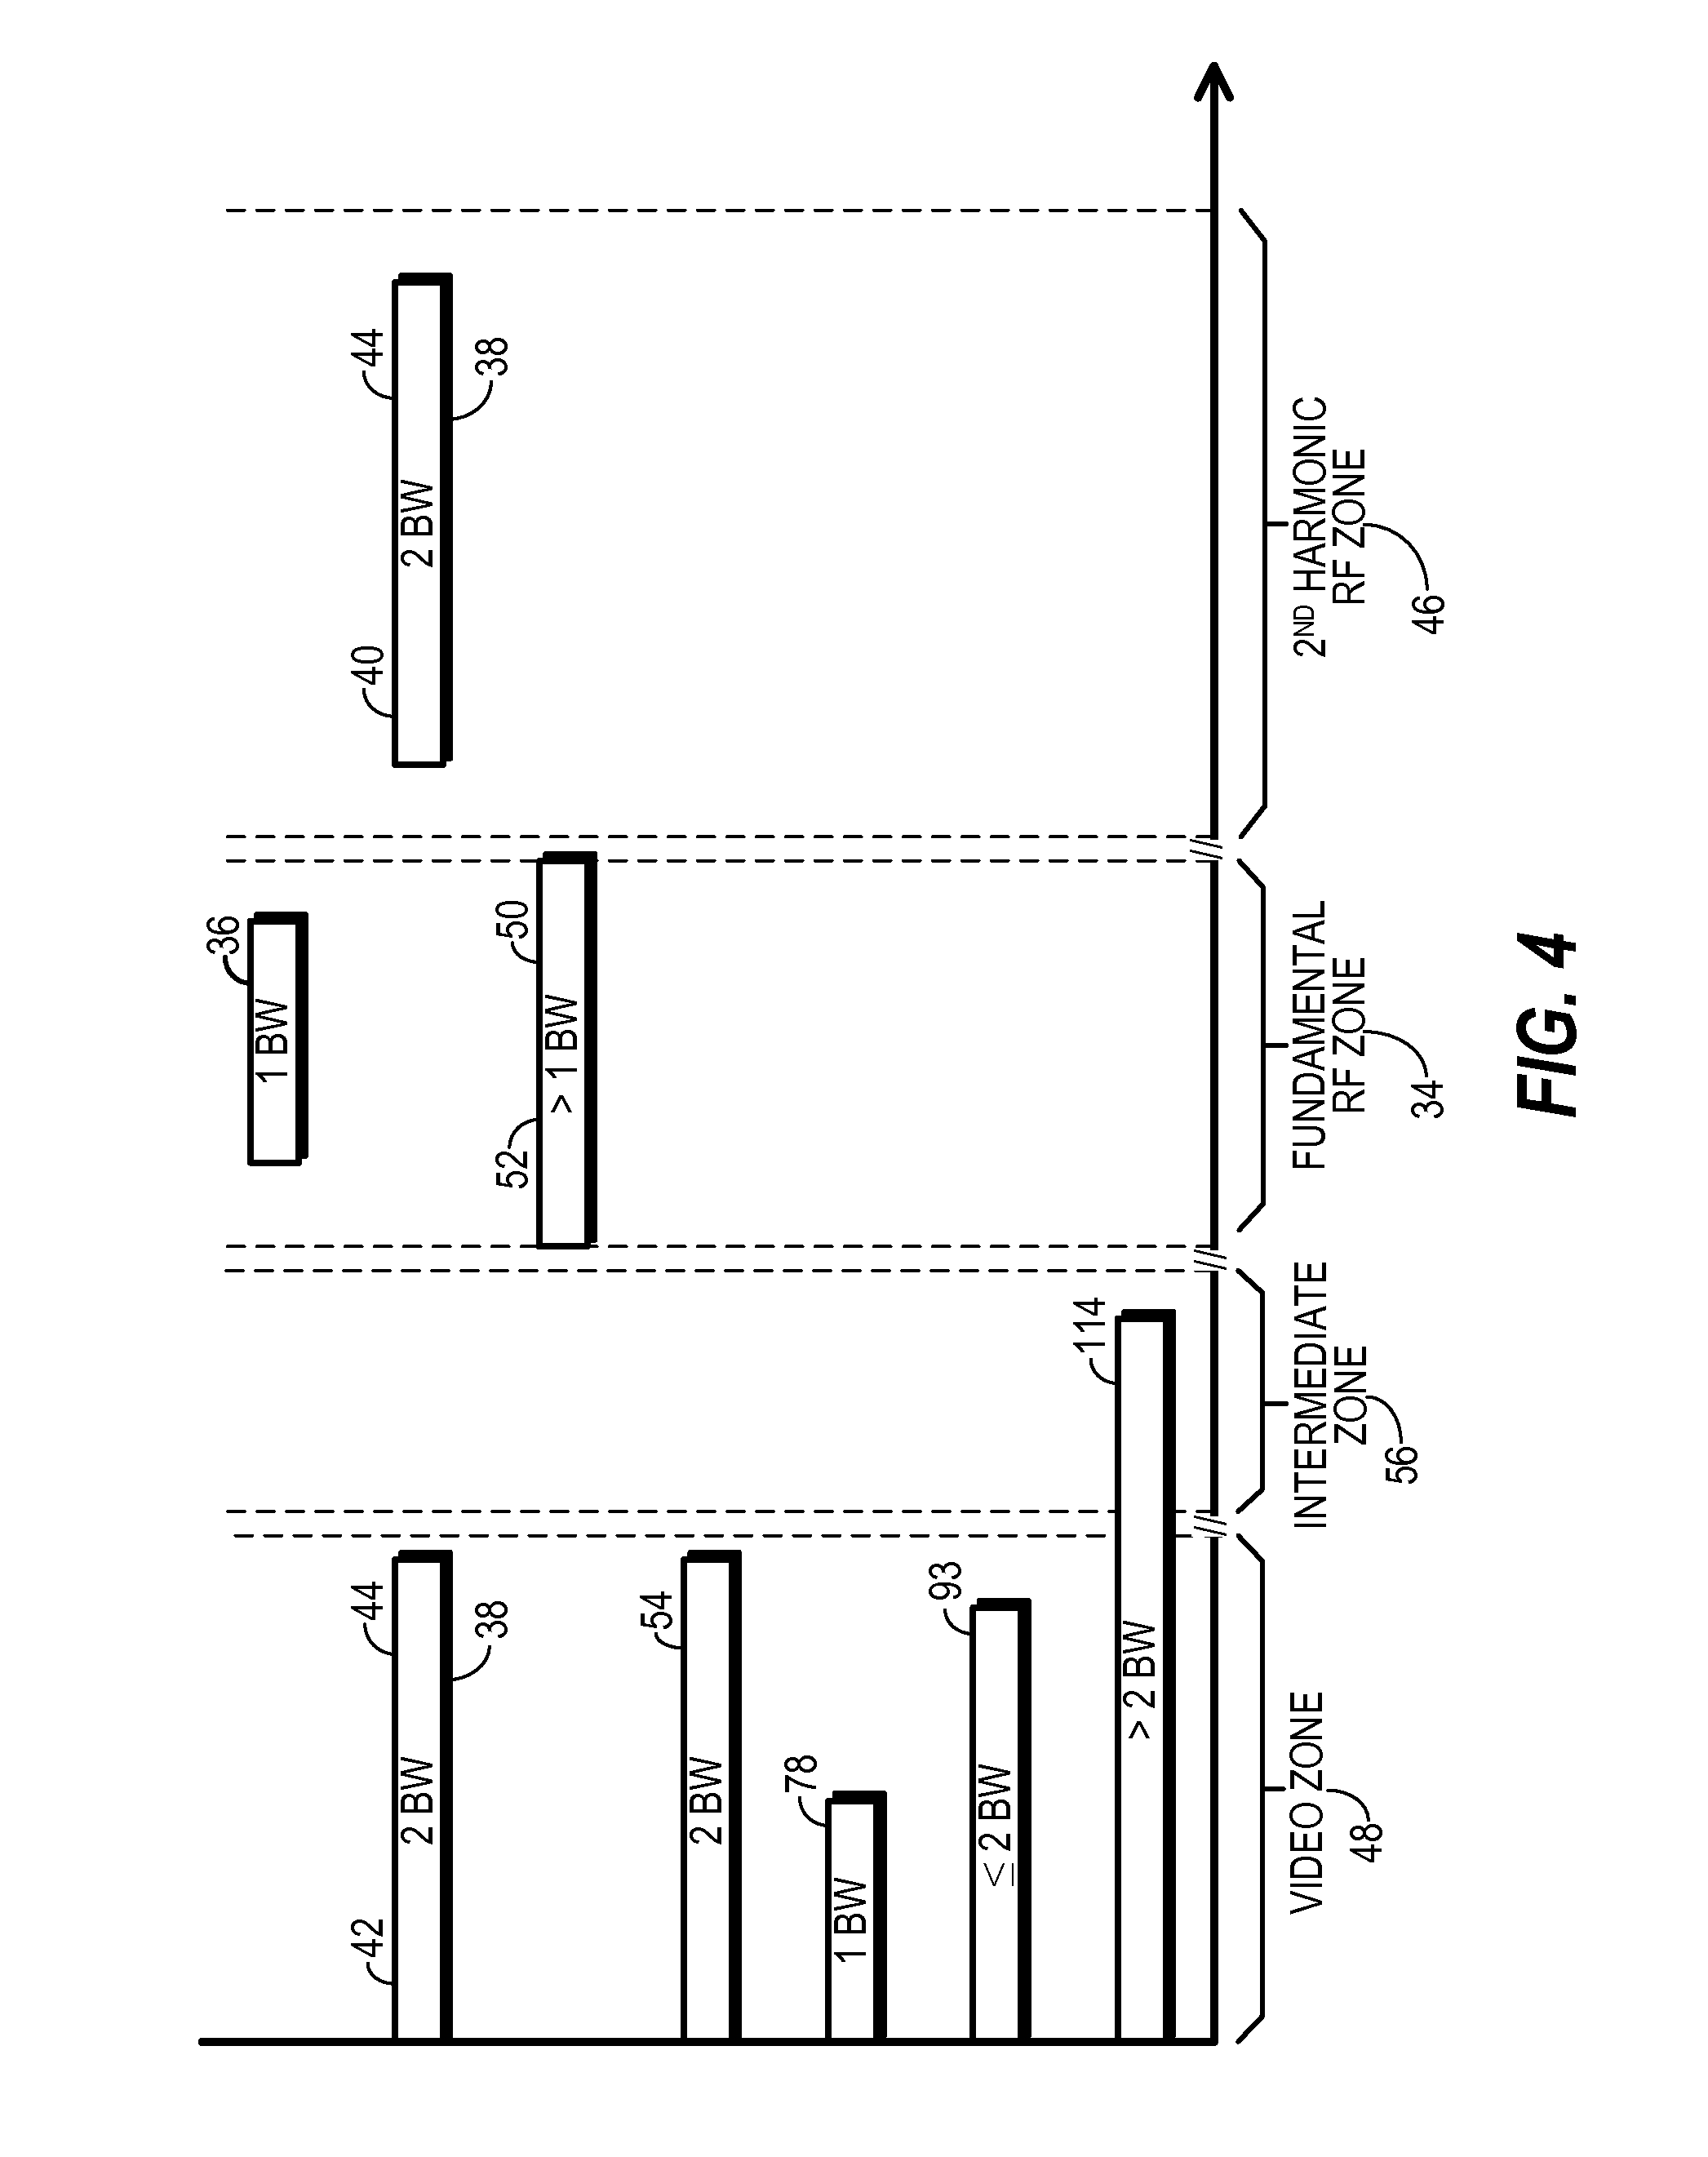 Transmitter and method for RF power amplifier having a bandwidth controlled, detroughed envelope tracking signal